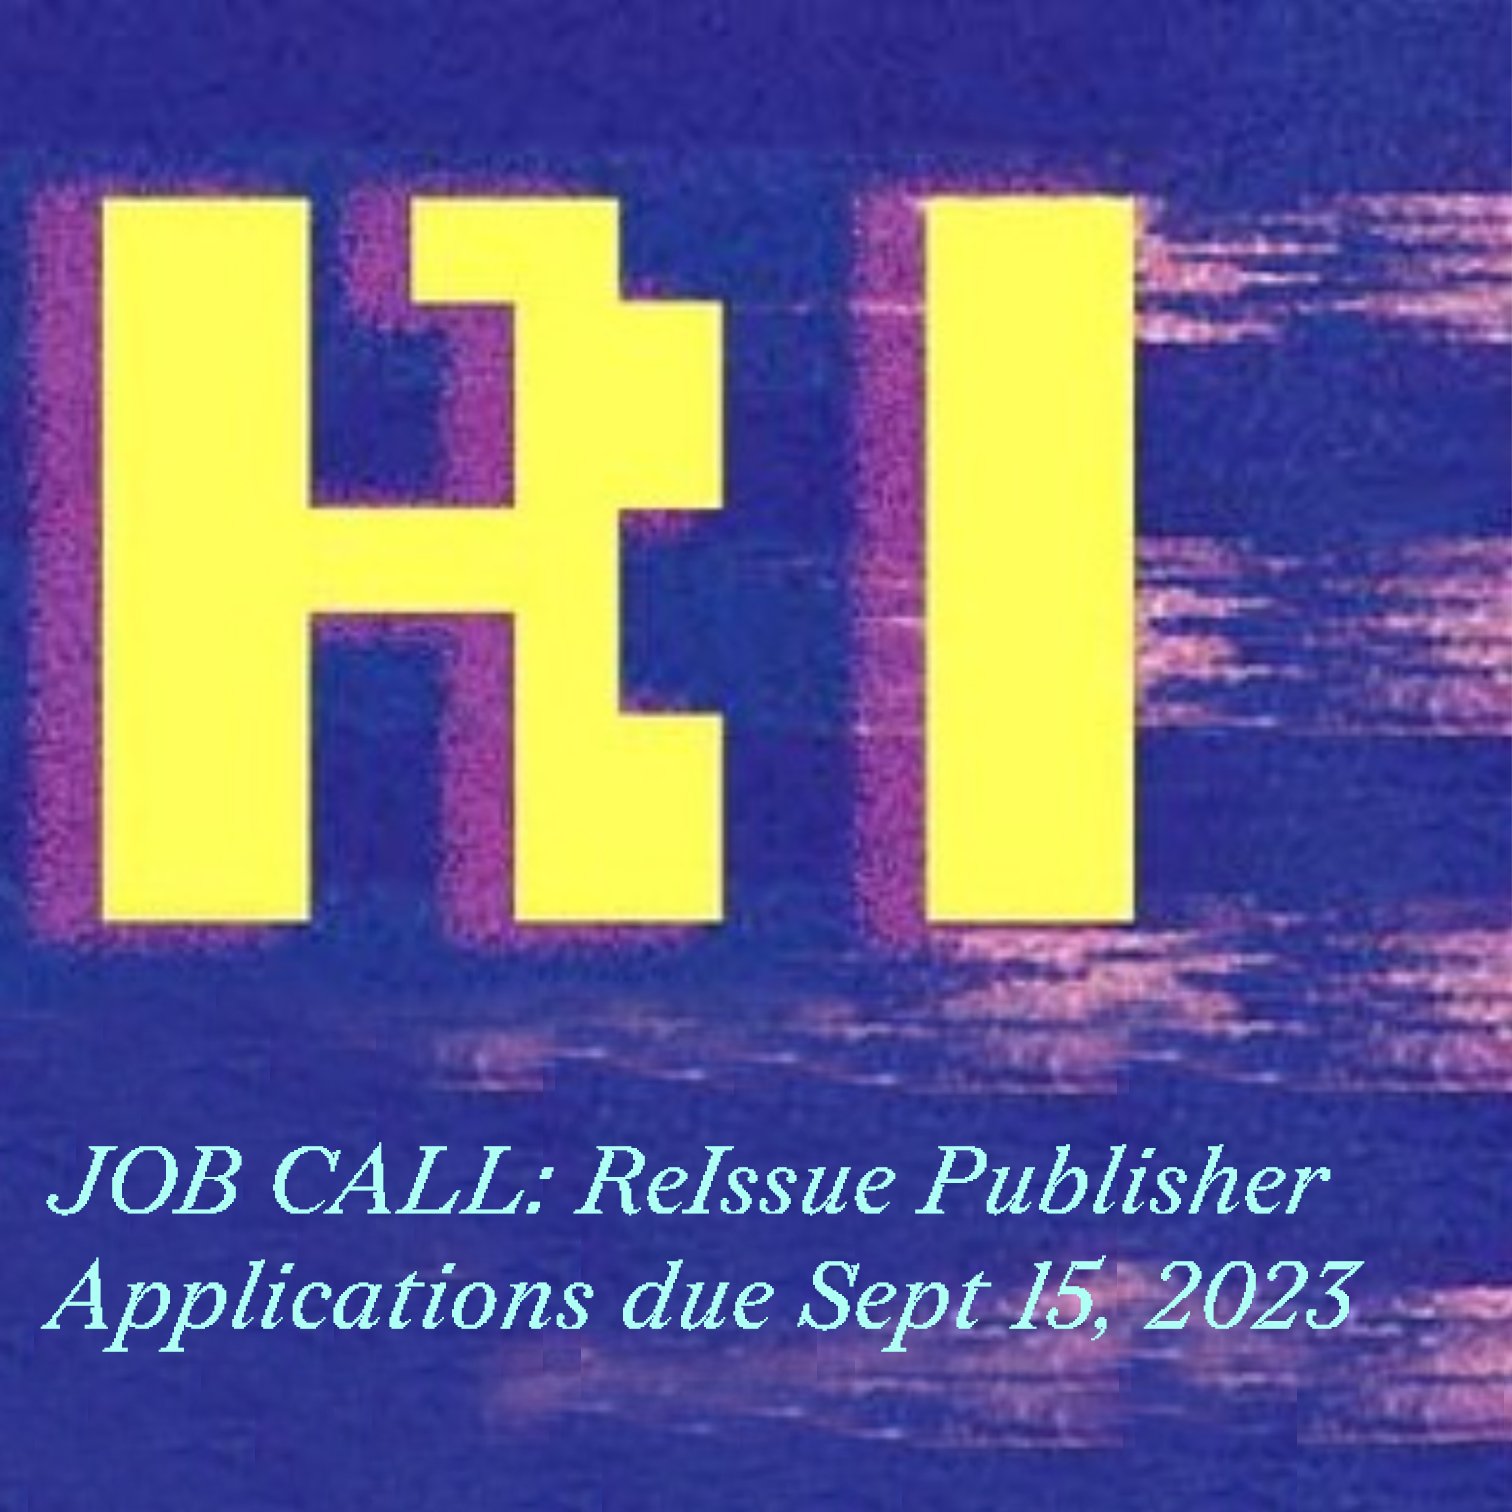 A pixelated dark blue backgrounw with yellow text that says RI, and light blue text that says: JOB CALL: ReIssue Publisher / Applications due Sept 15, 2023